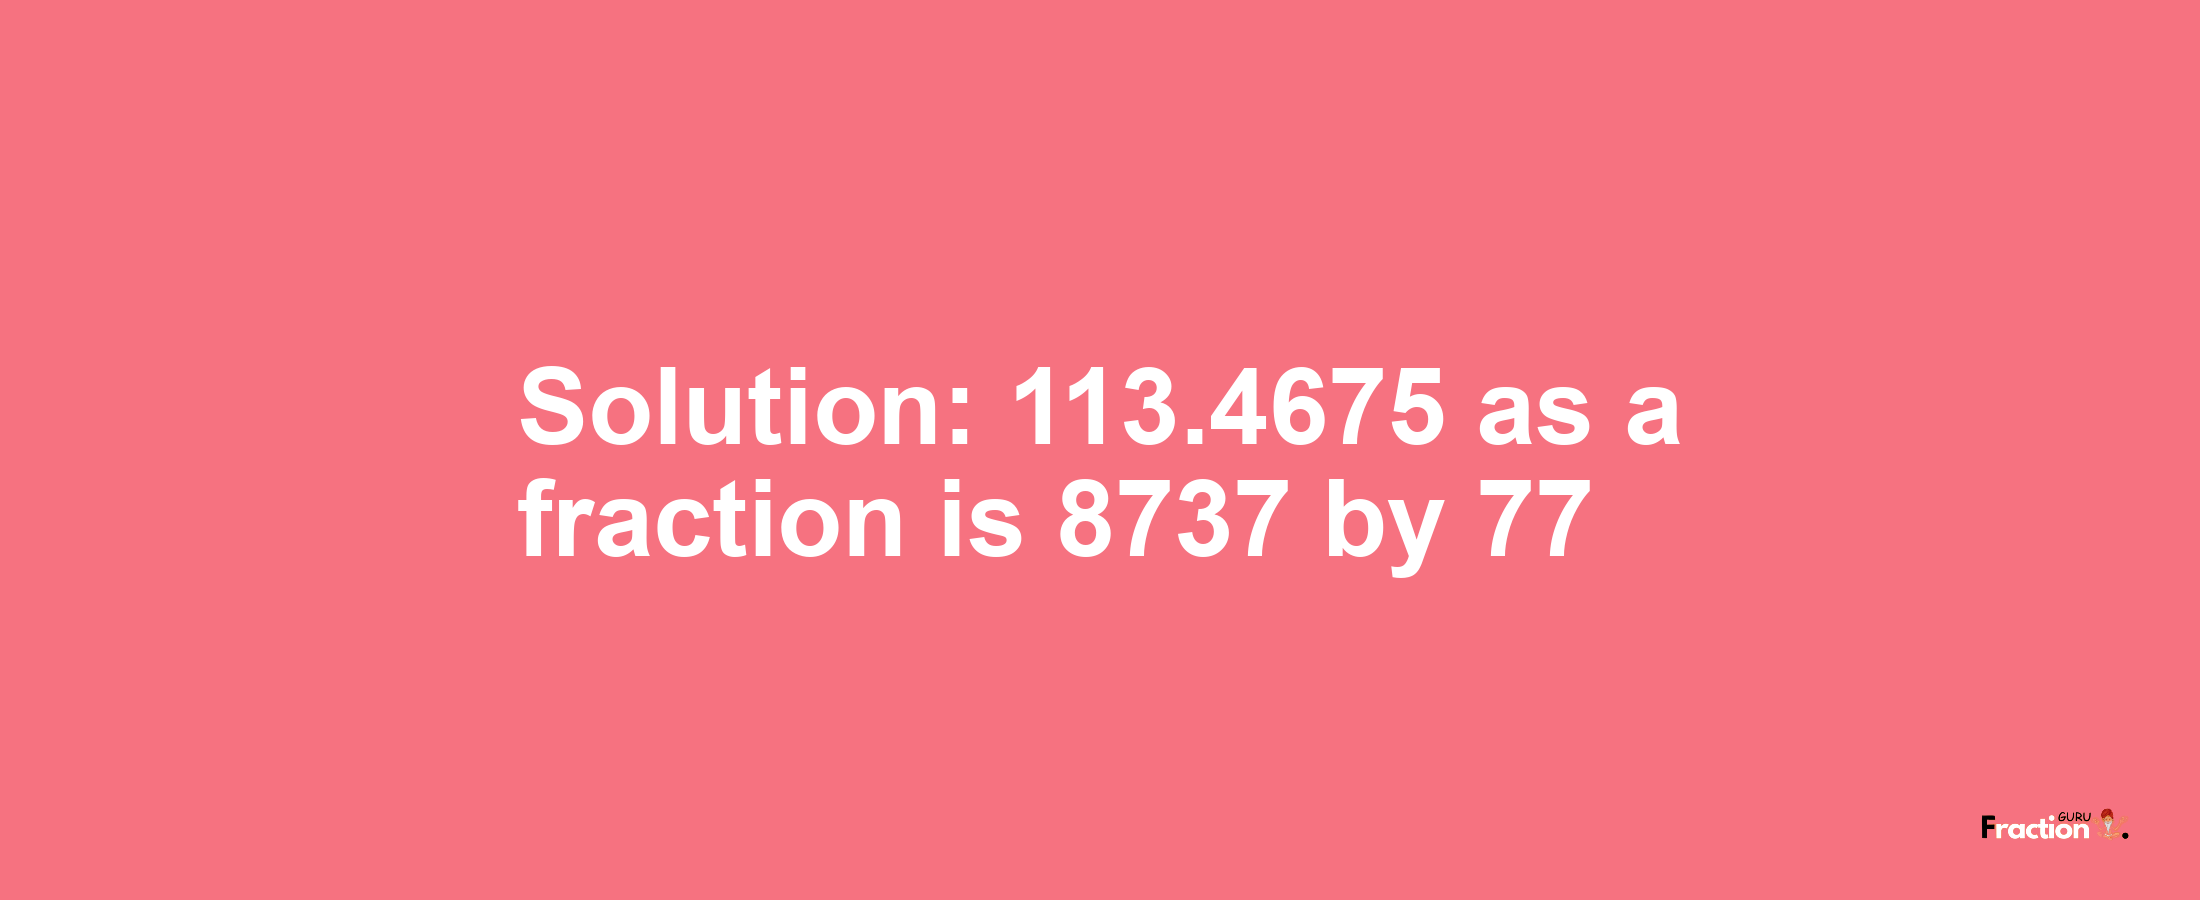 Solution:113.4675 as a fraction is 8737/77